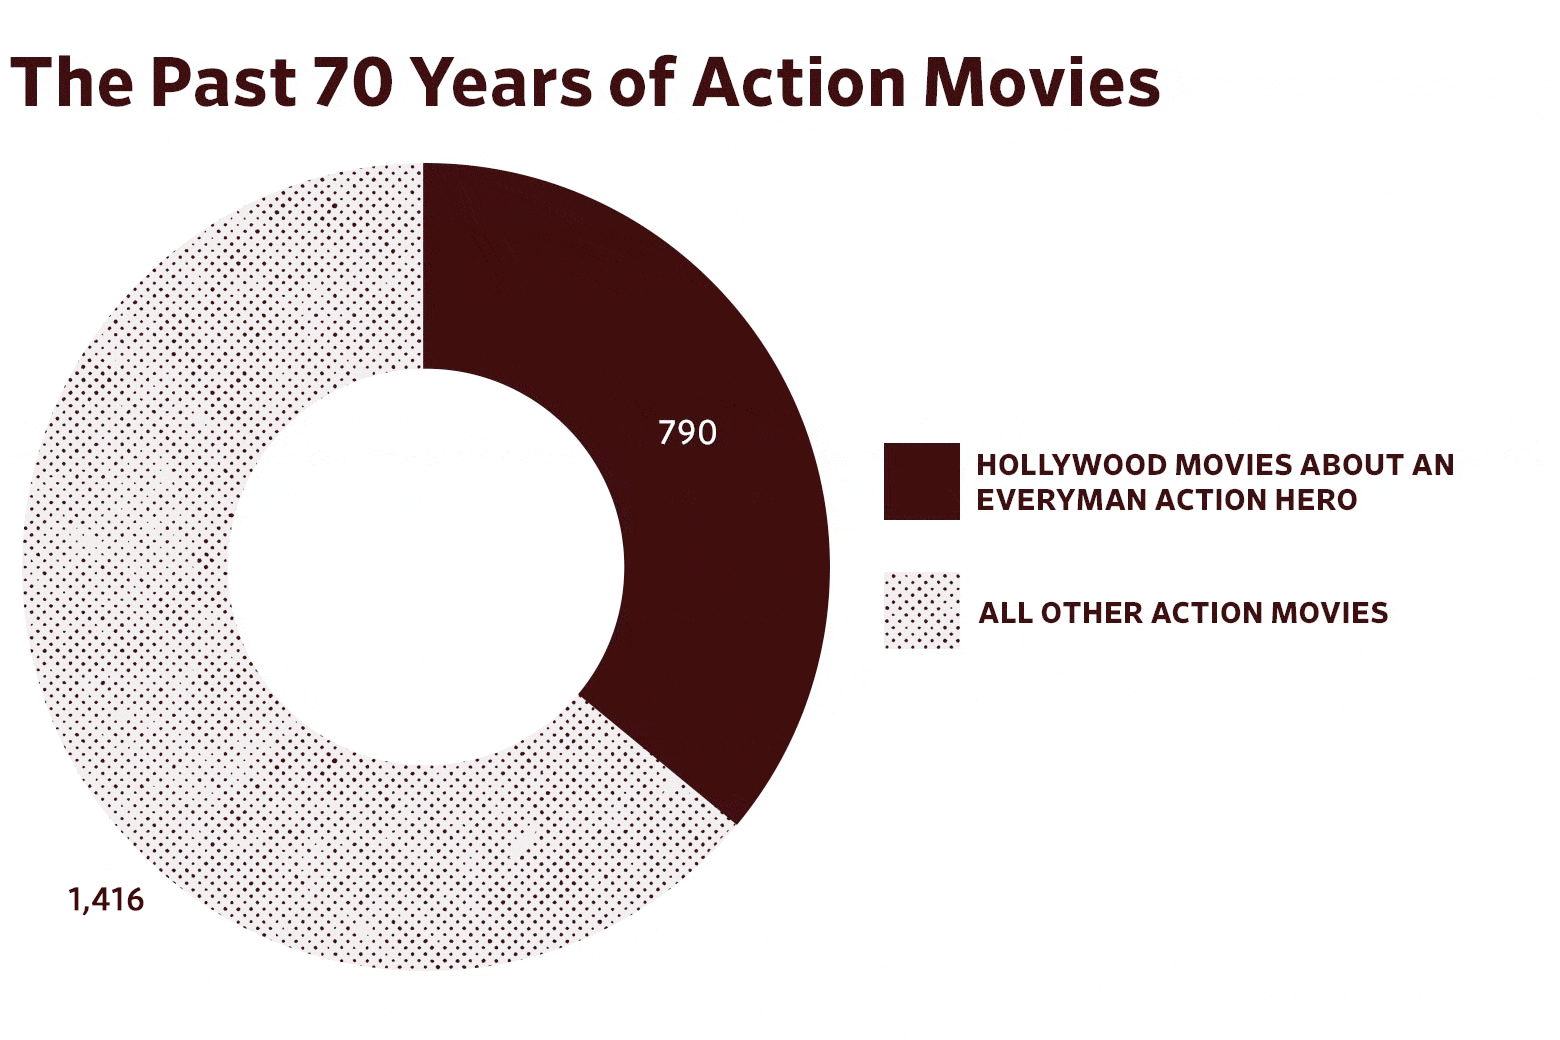 Chart, titled The Past 70 Years of Action Movies, with 1,1416 total movies and 790 action movies.